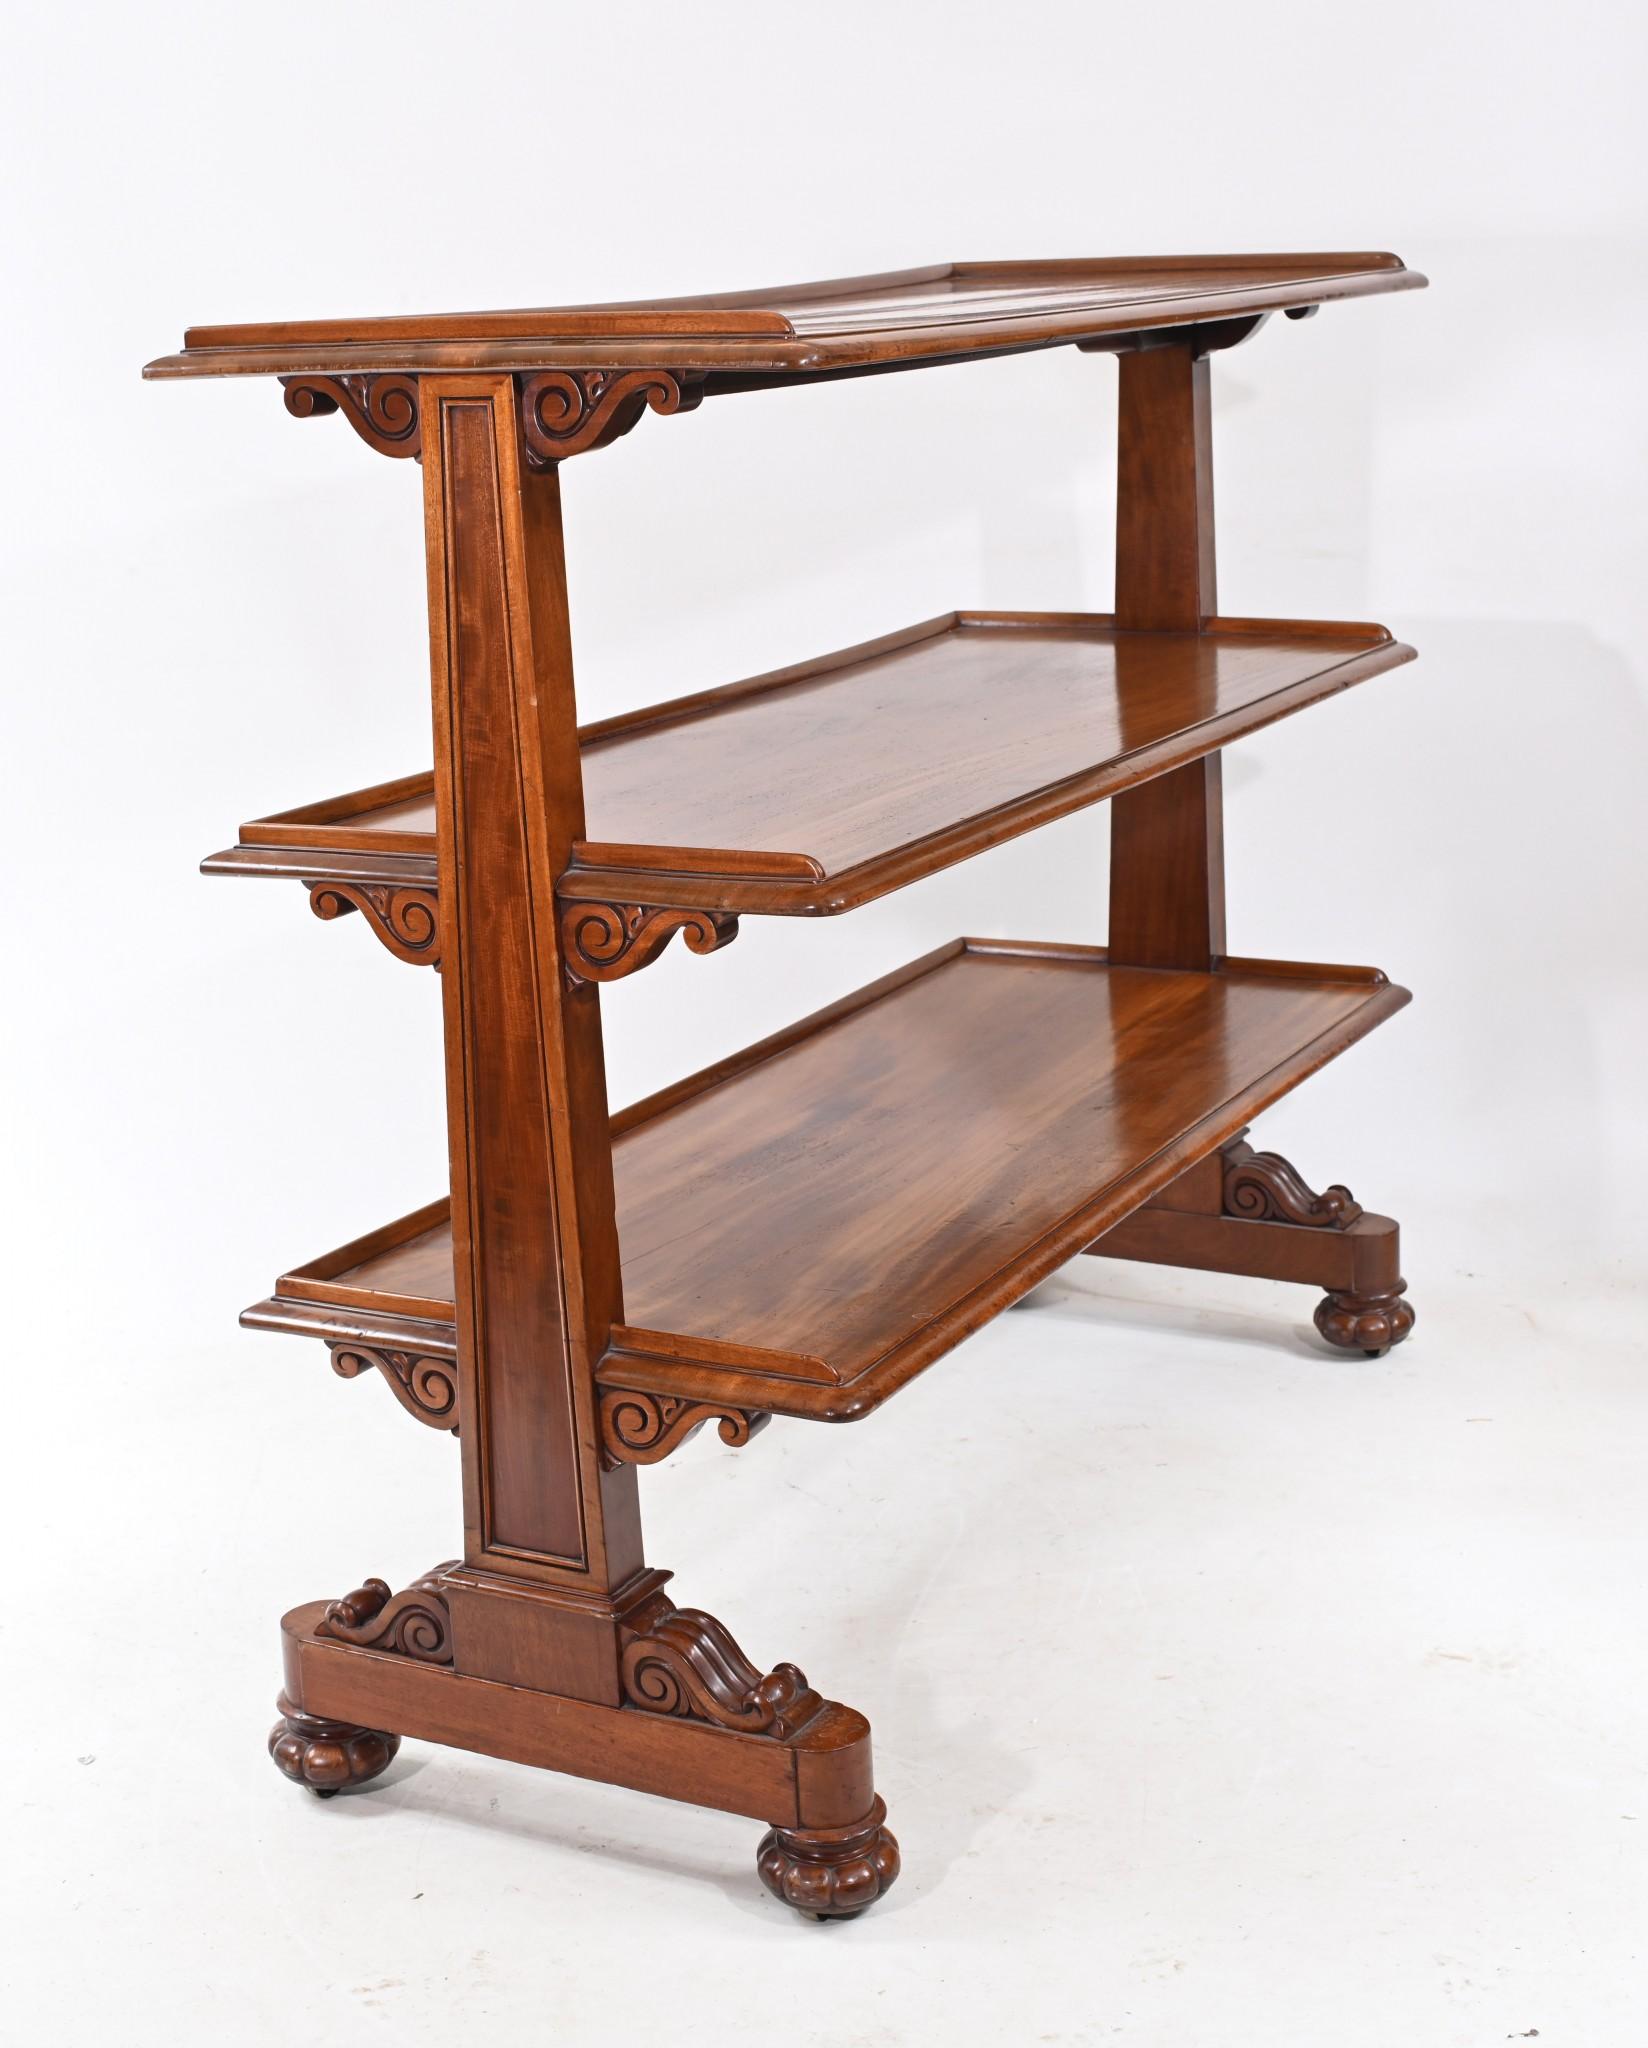 Wonderful Victorian dumb waiter in the manner of Gillows of Lancaster
Hand crafted from mahogany makes for a great bookcase or shelf unit
Sometimes also referred to as a serving table
Purchased from a dealer in Petworth, West Sussex
Some of our